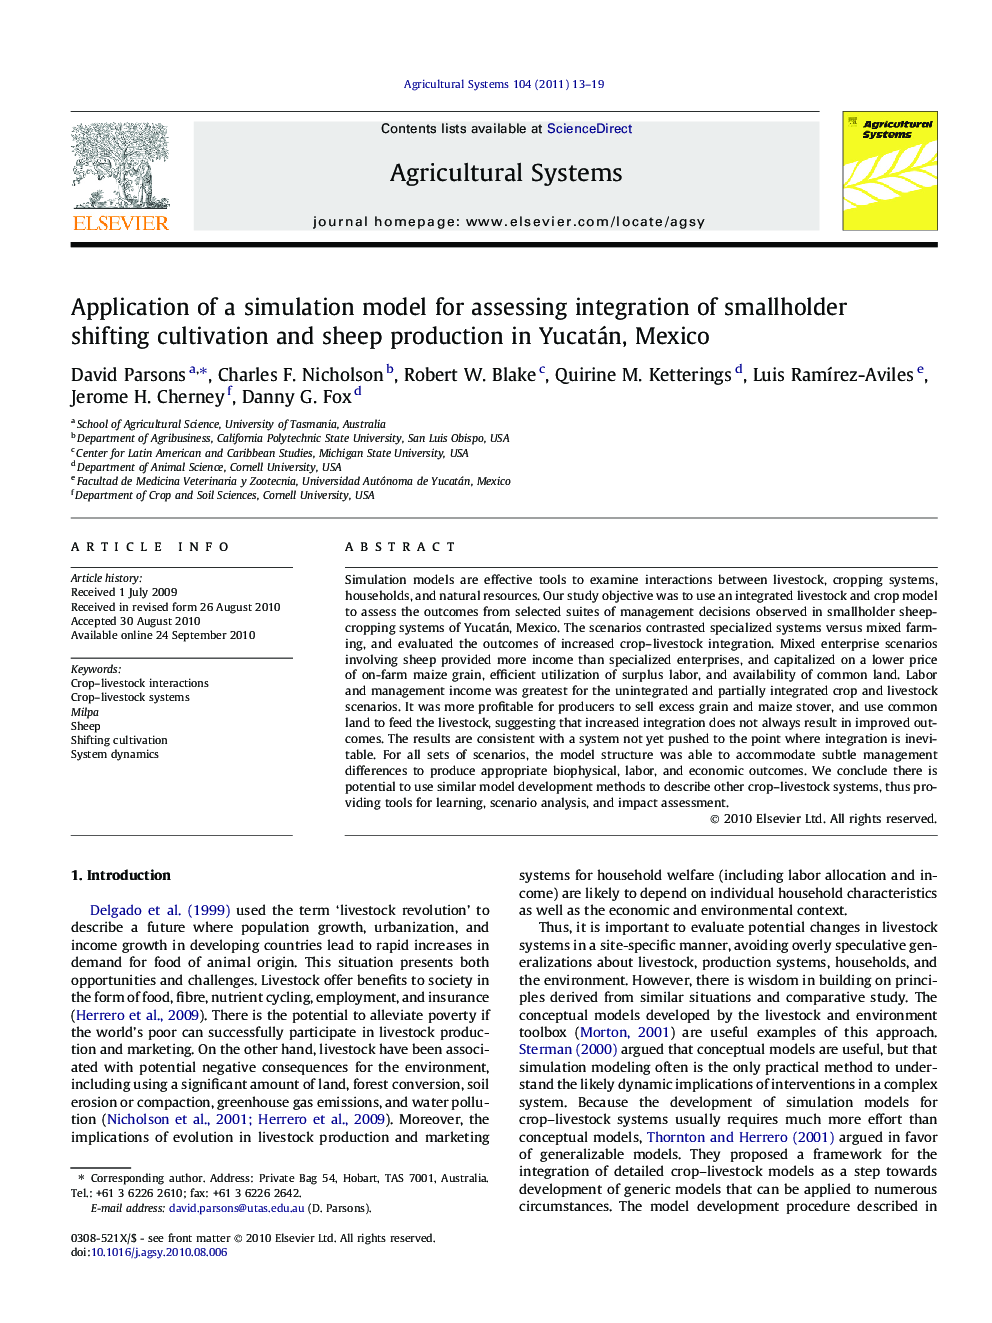 Application of a simulation model for assessing integration of smallholder shifting cultivation and sheep production in Yucatán, Mexico